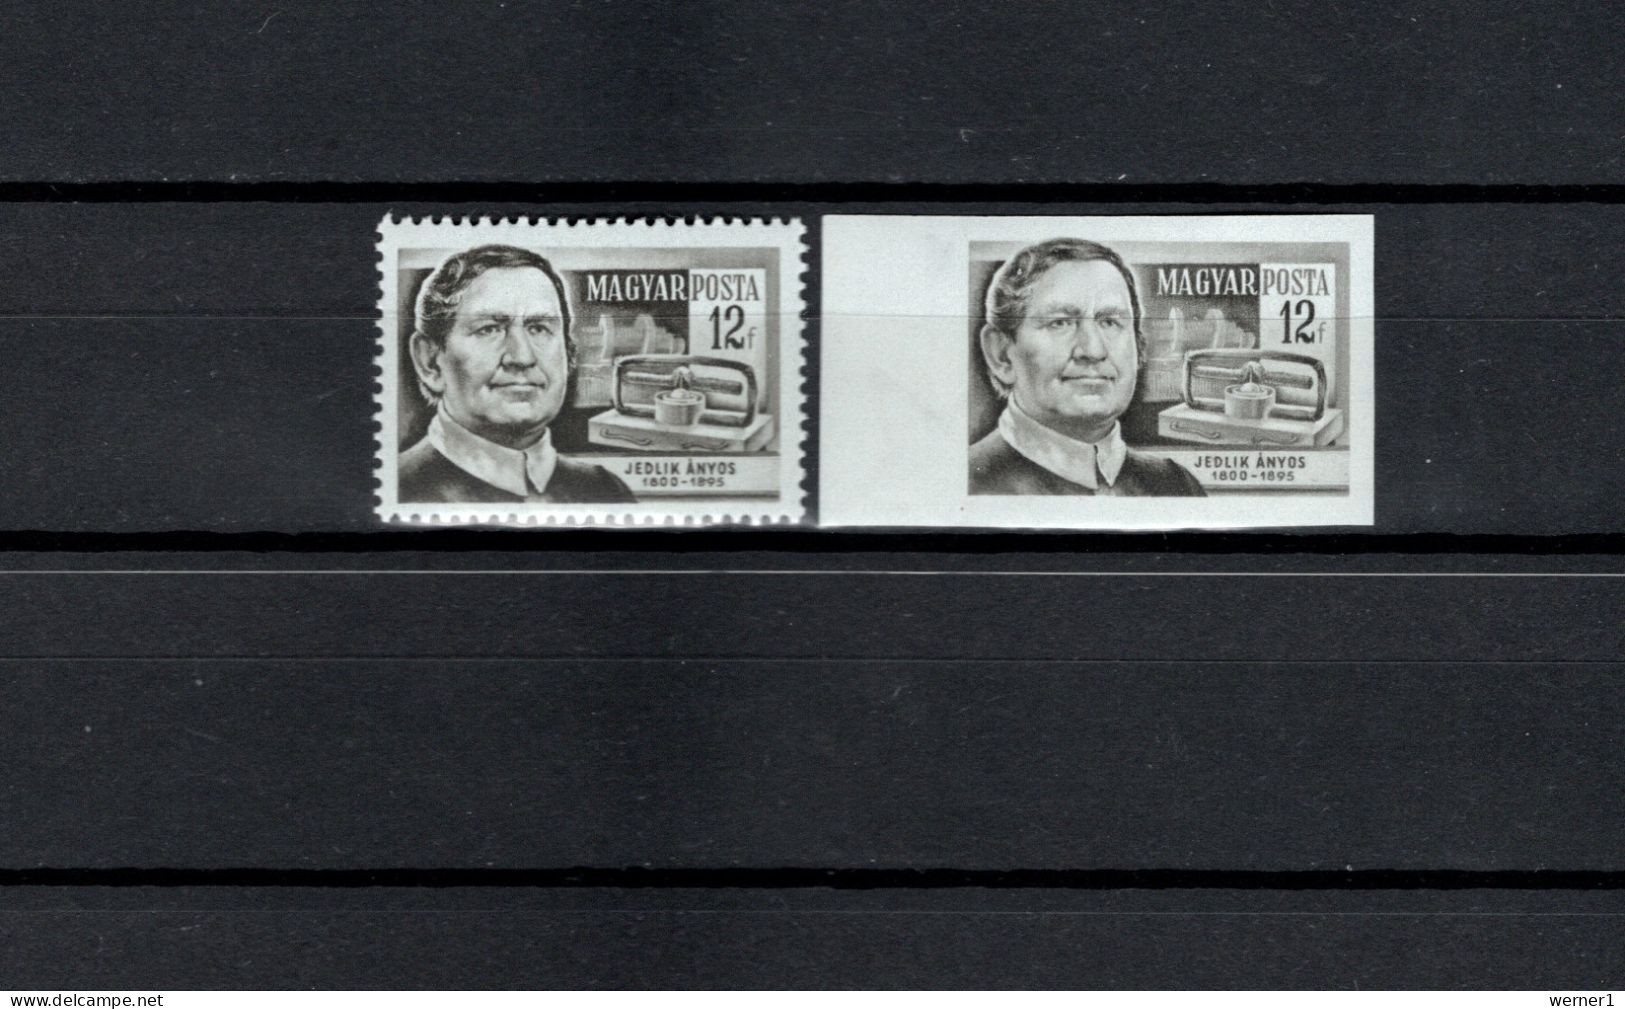 Hungary 1954 Space, Anyos Jedlik 12F Stamp Perf. And Imperf. MNH - Europe